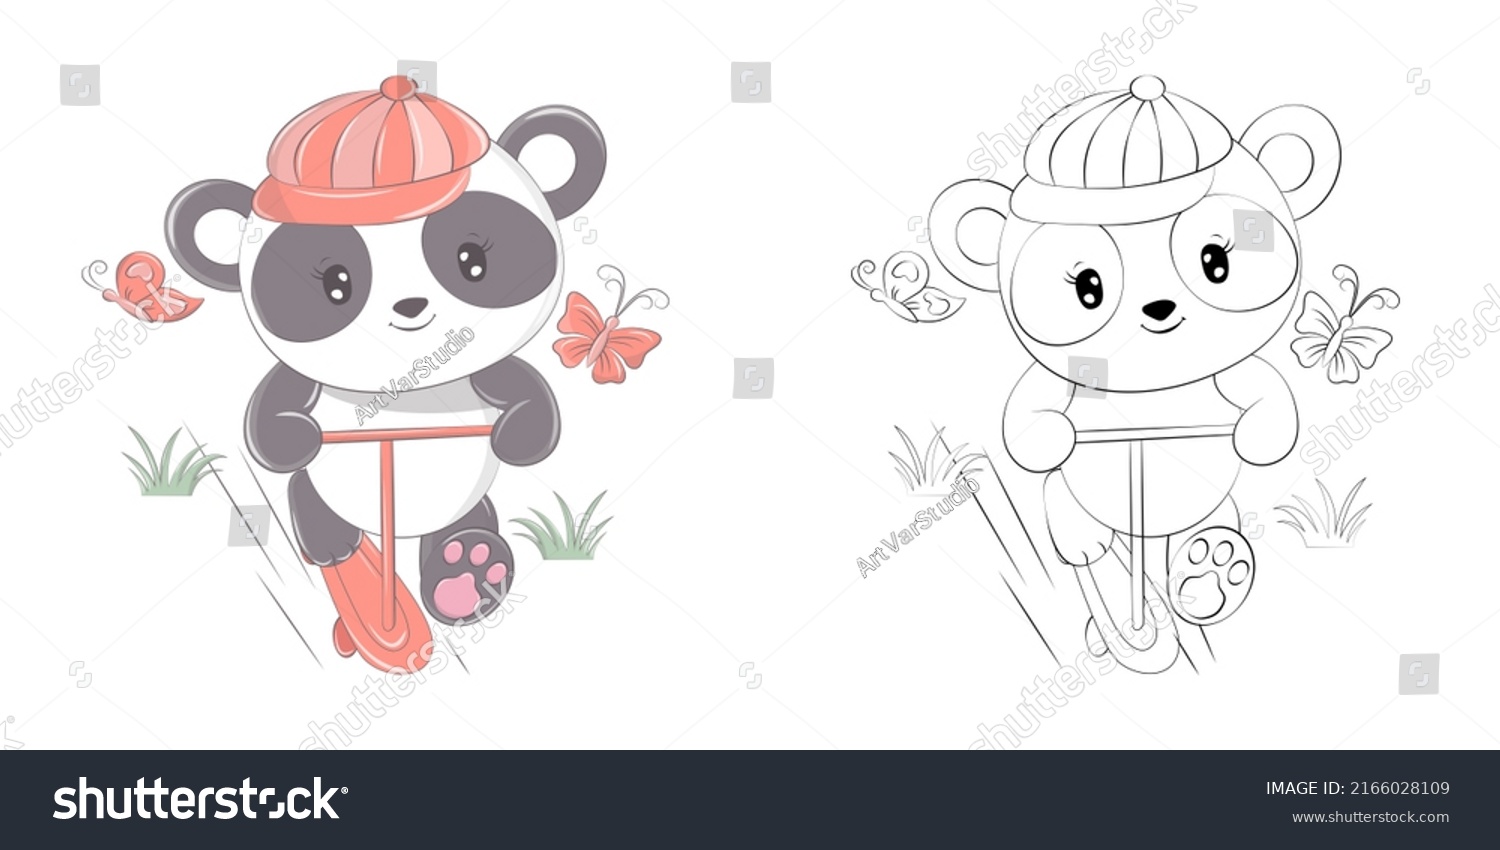 SVG of Cute Panda Clipart for Coloring Page and Illustration. Happy Clip Art Panda on a Scooter. Vector Illustration of an Animal for Stickers, Prints for Clothes, Baby Shower, Coloring Pages.  svg